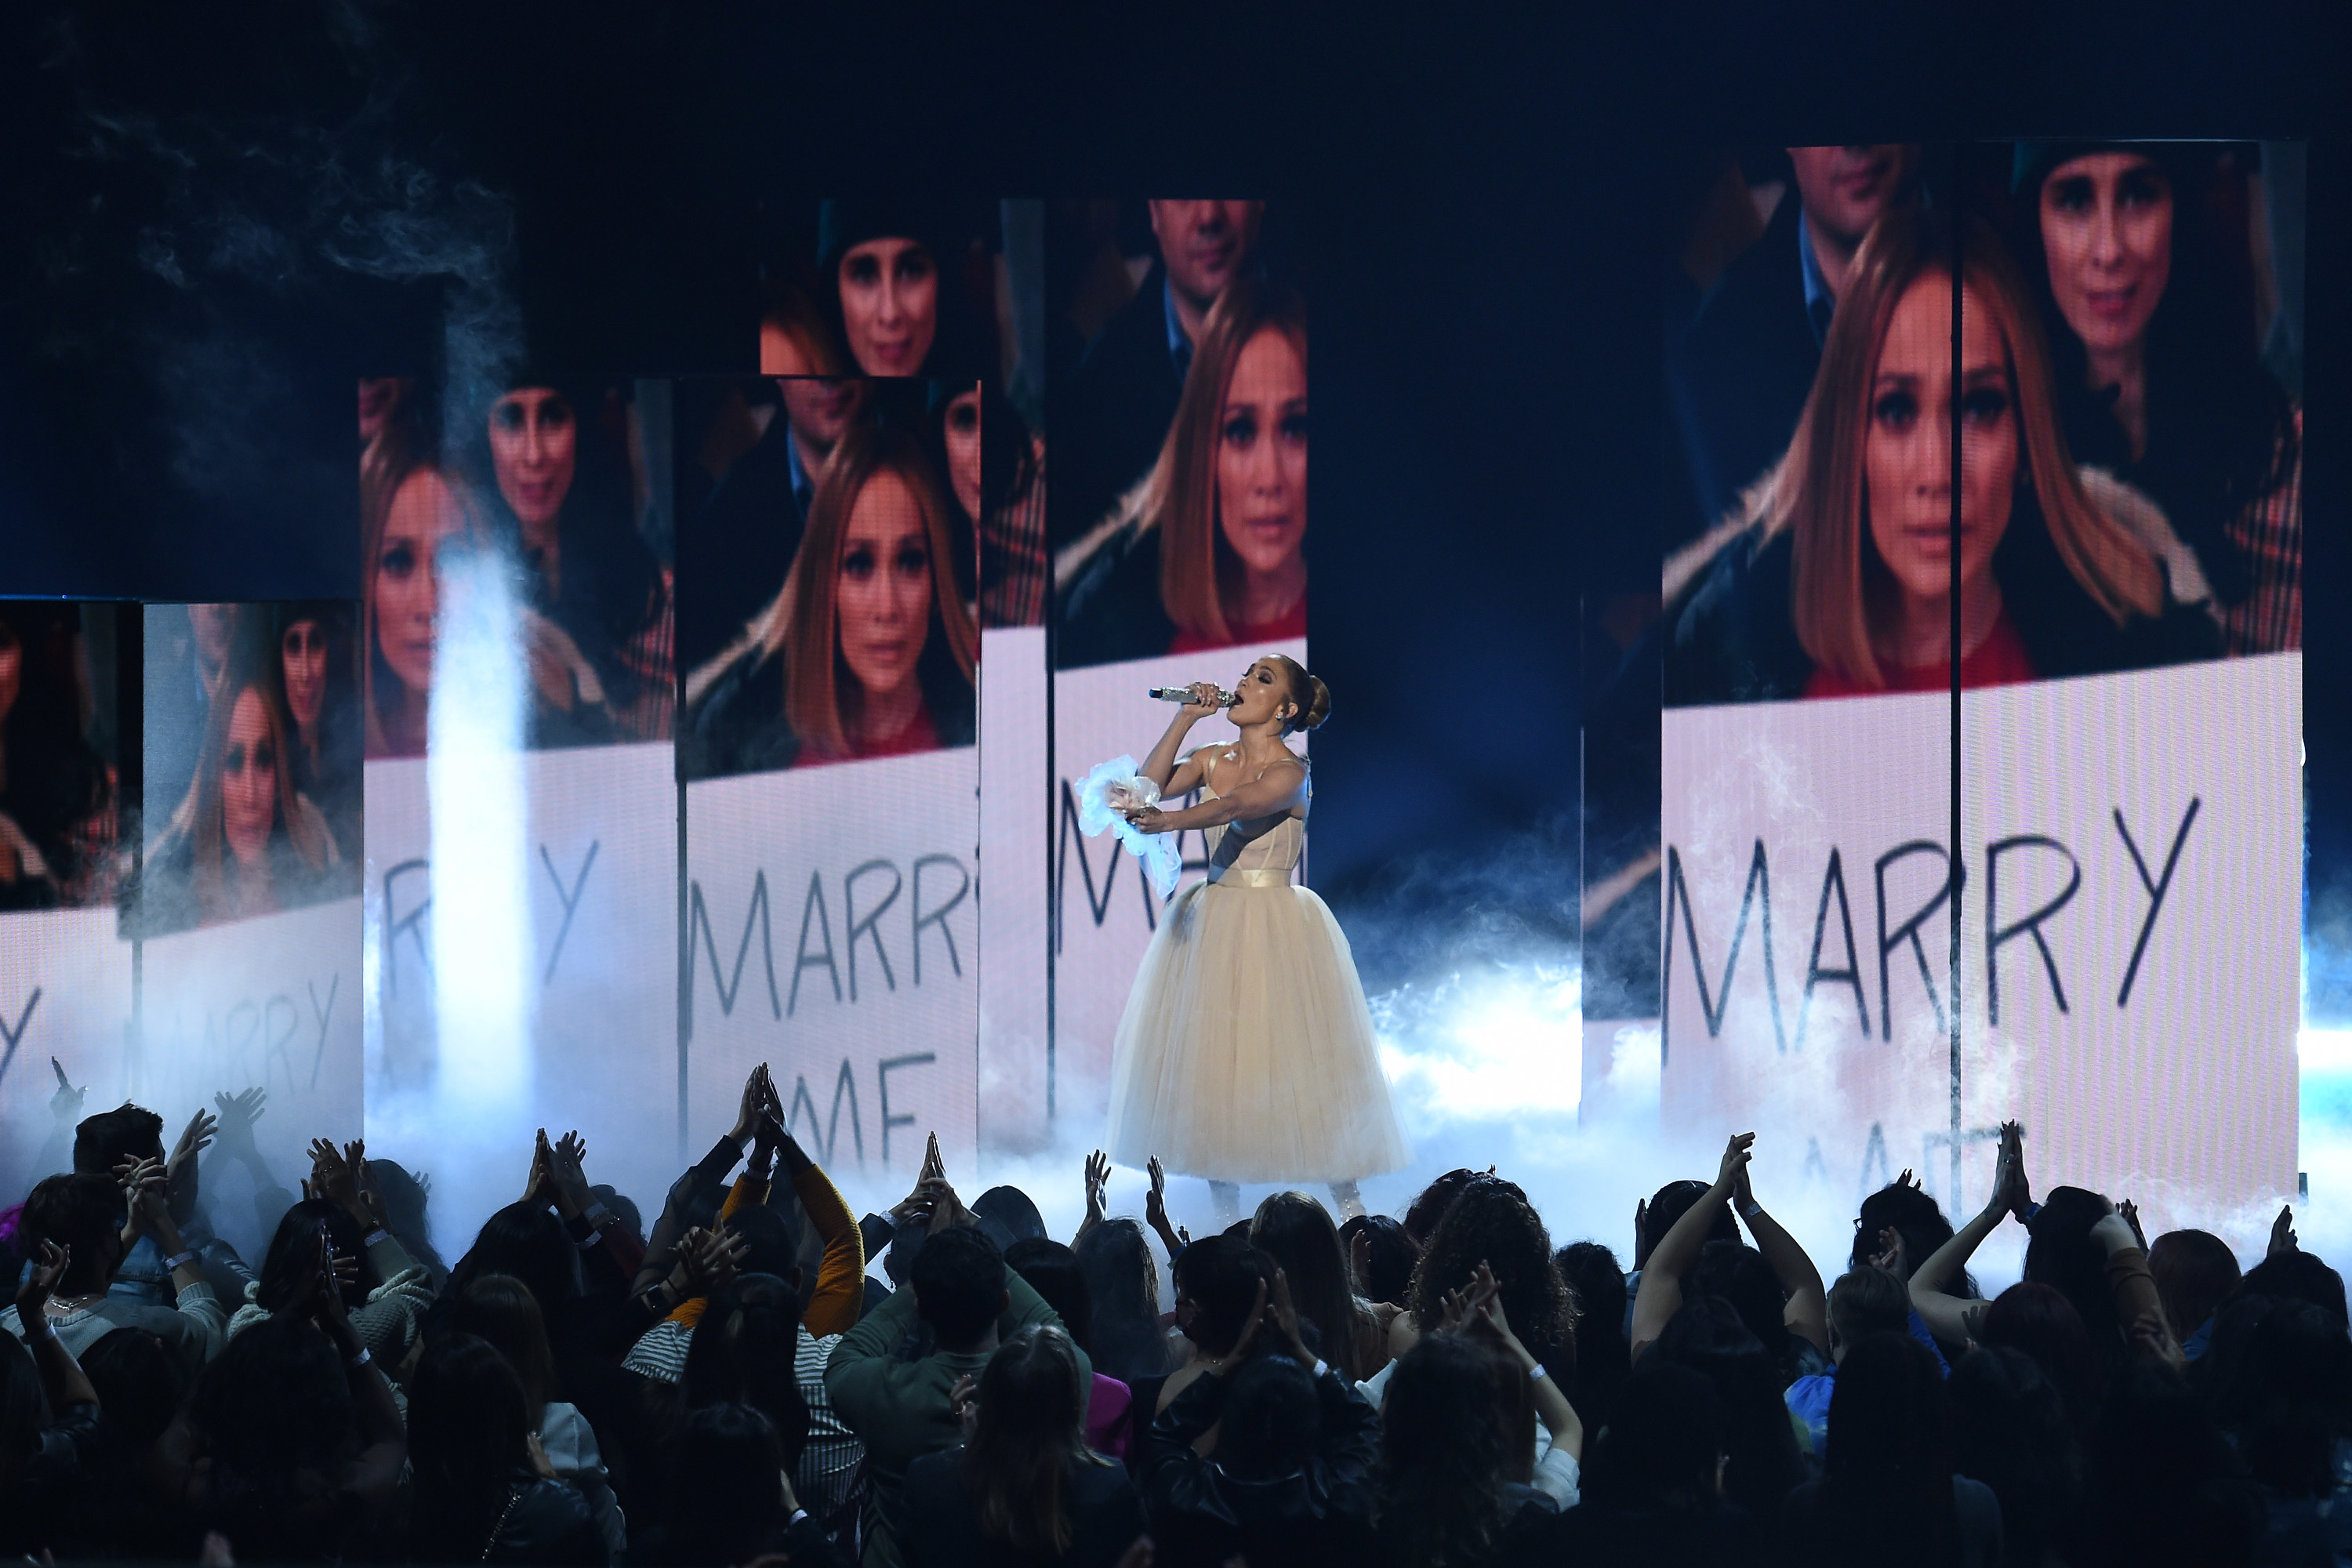 jlo is performing in front of marry me signs